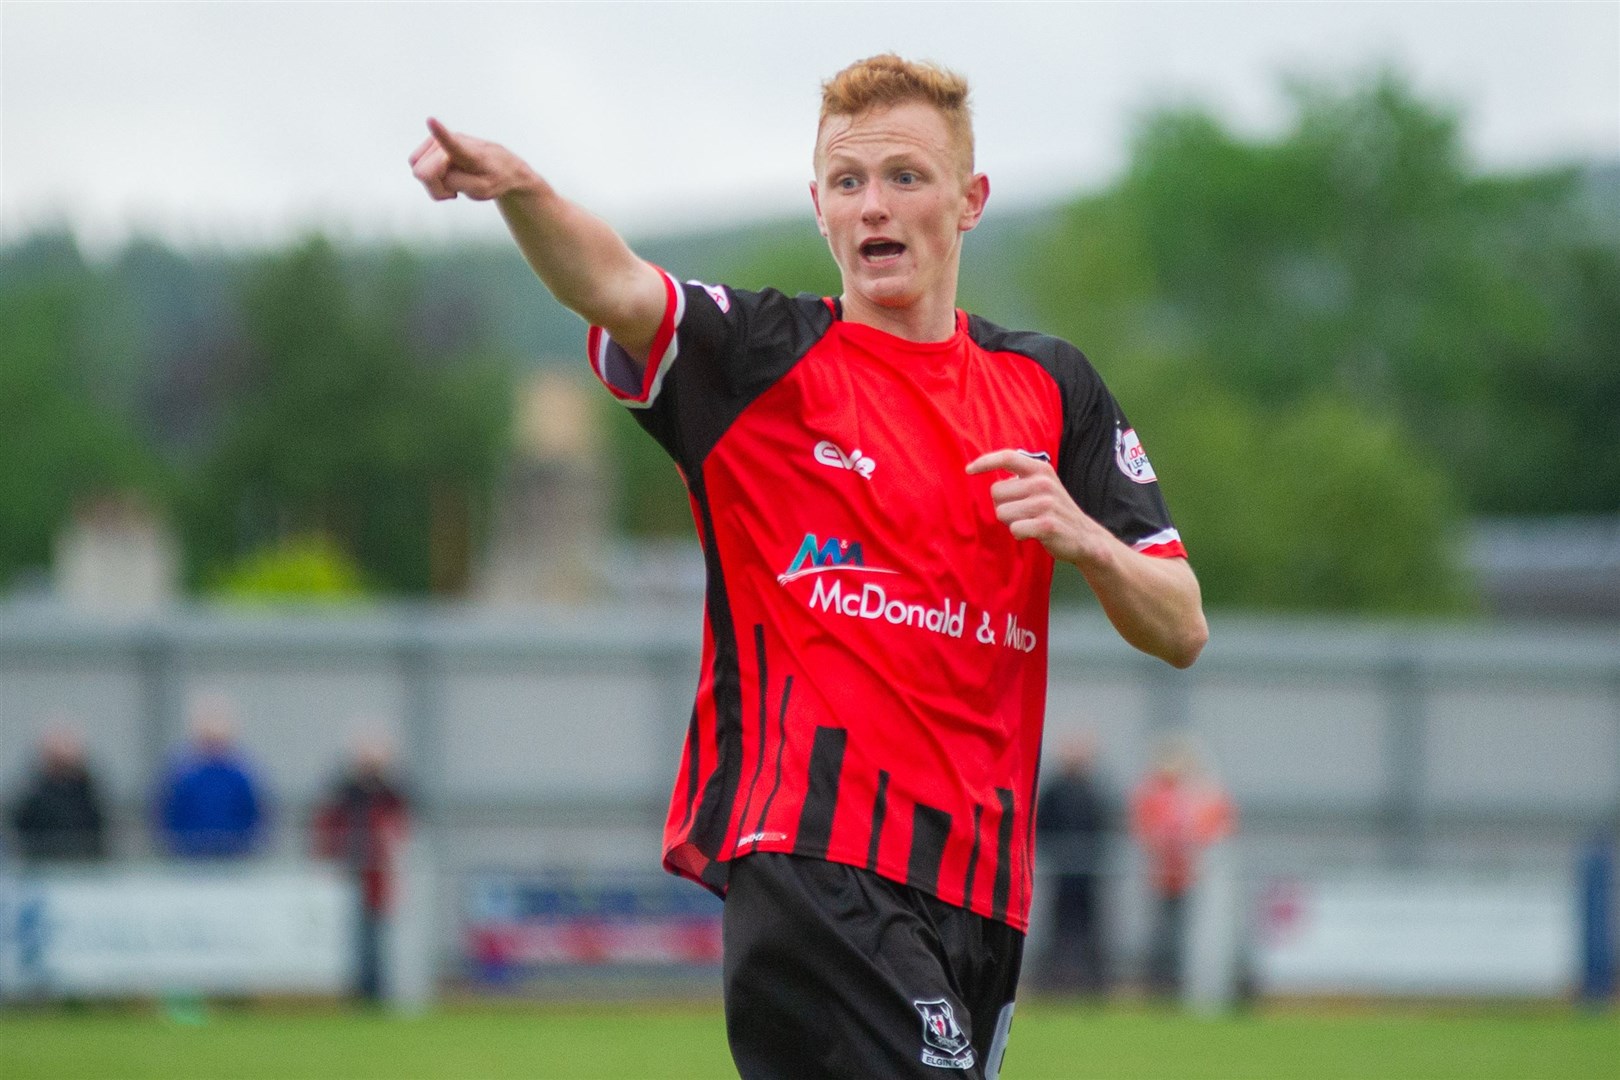 Elgin City are unable to make Russell Dingwall a contract offer due to the Covid-19 situation.